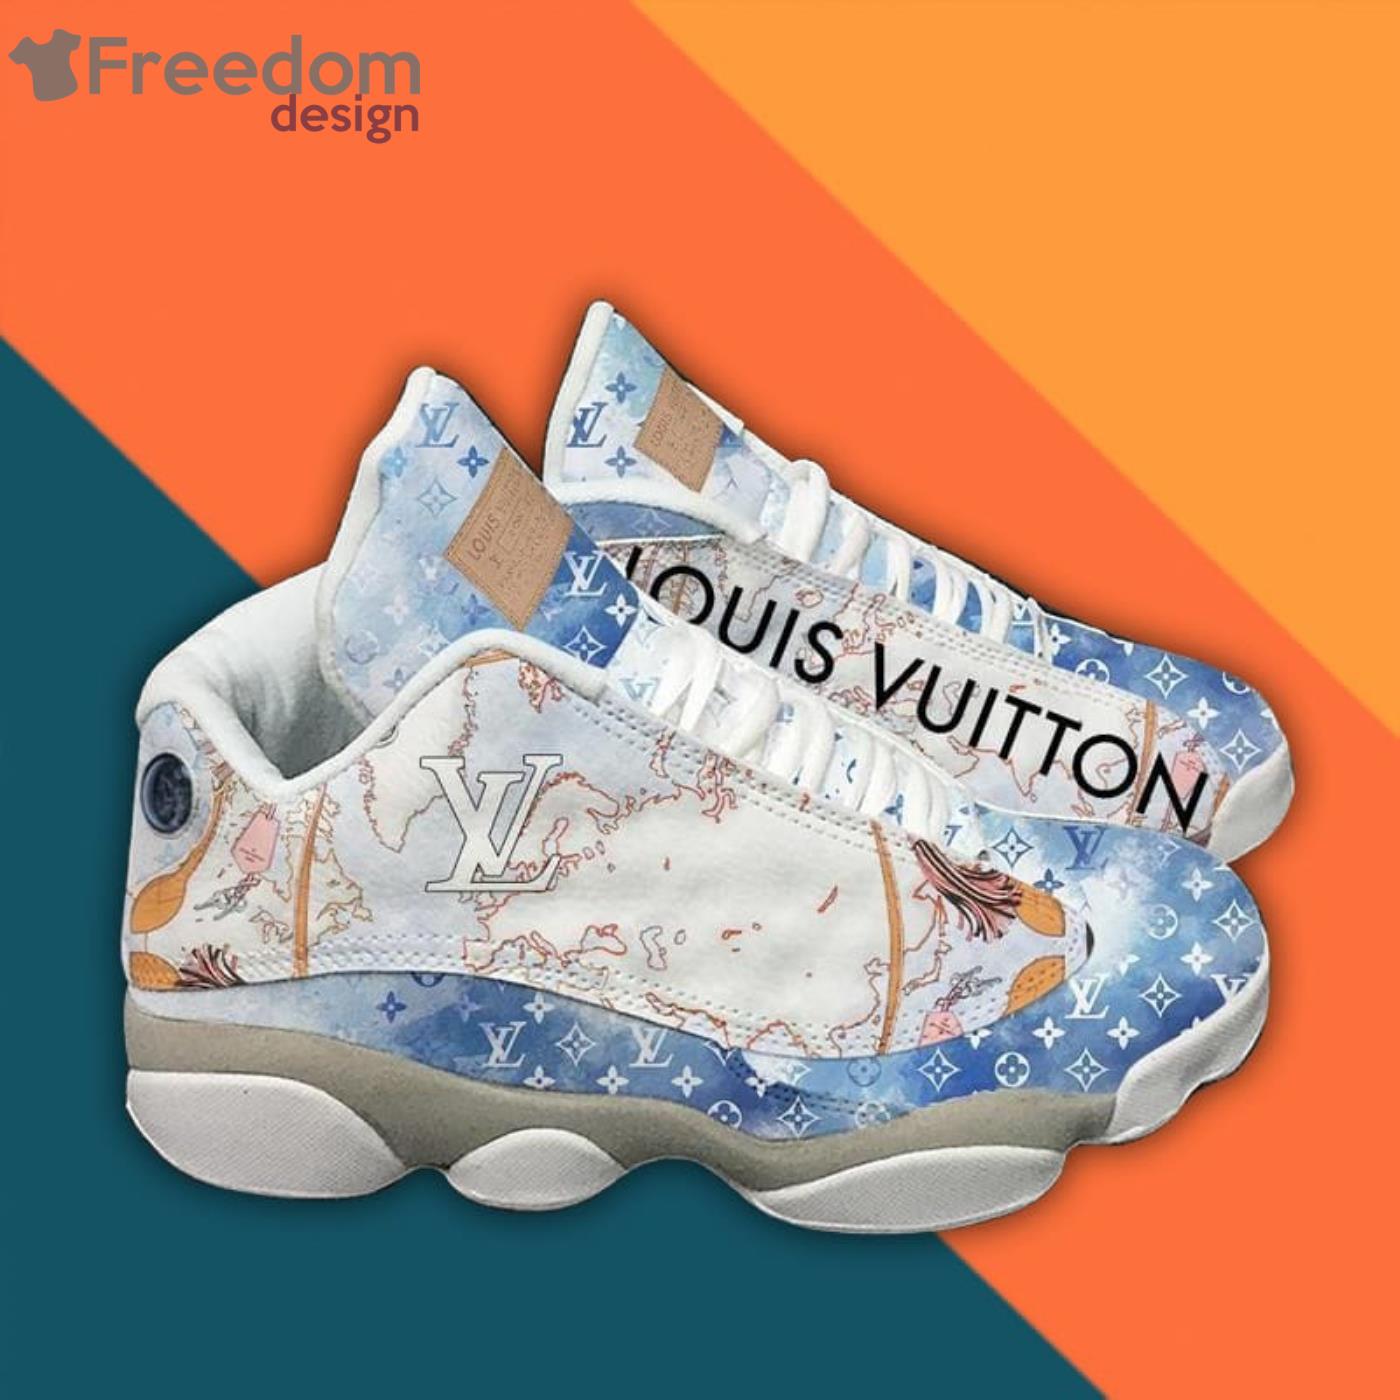 Louis Vuitton Air Jordan 13 Sneakers Shoes Luxury Brand Gifts For